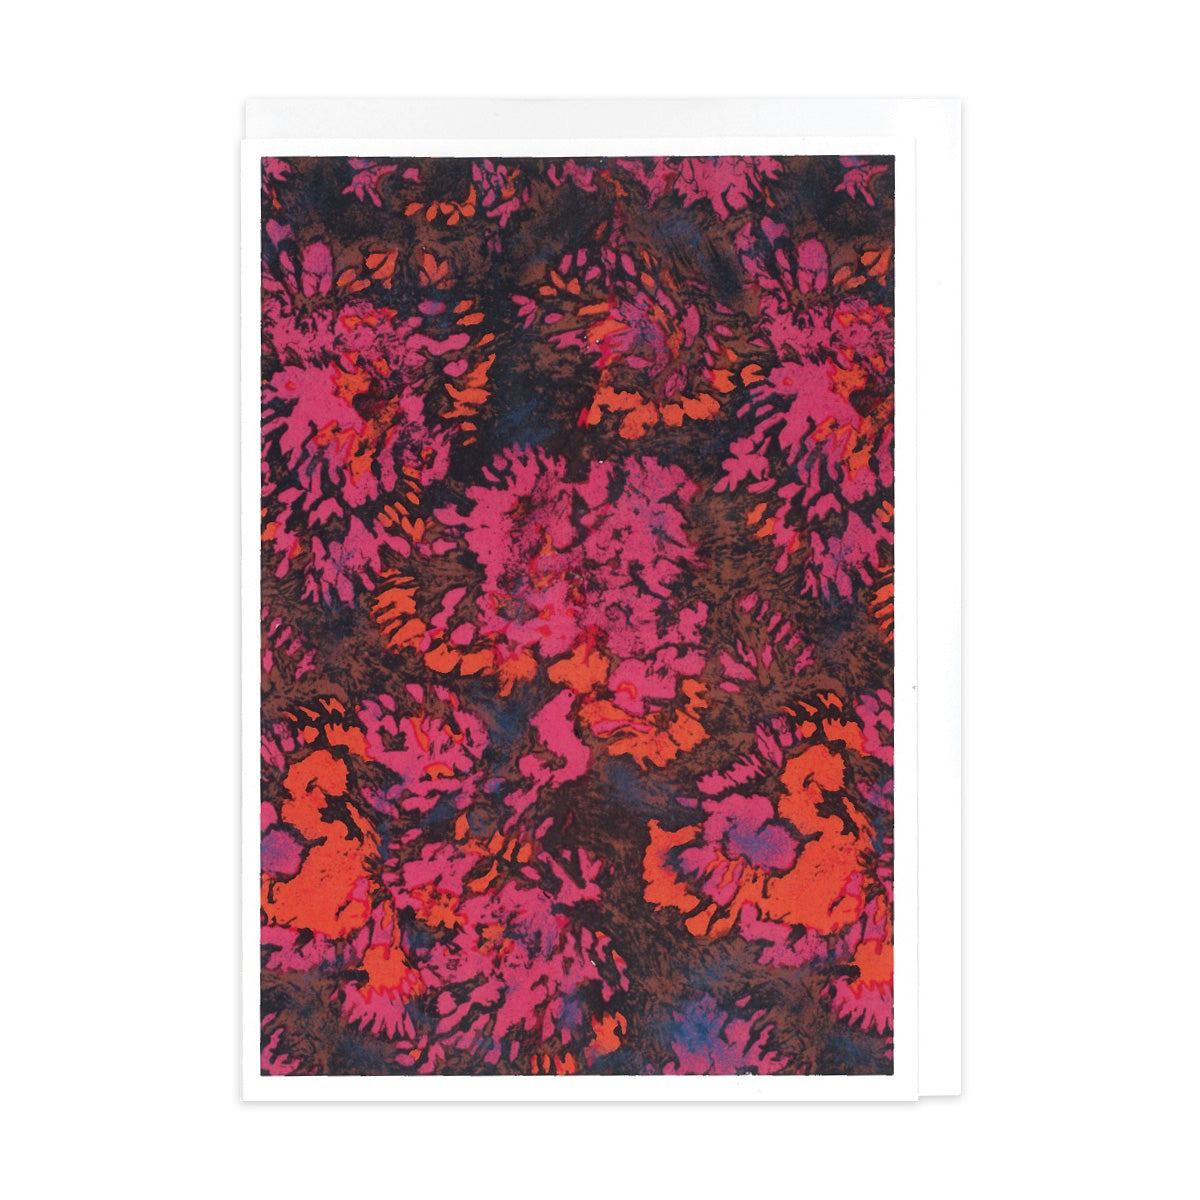 Greetings card featuring red and pink floral design by Shirley Craven, with a white envelope.